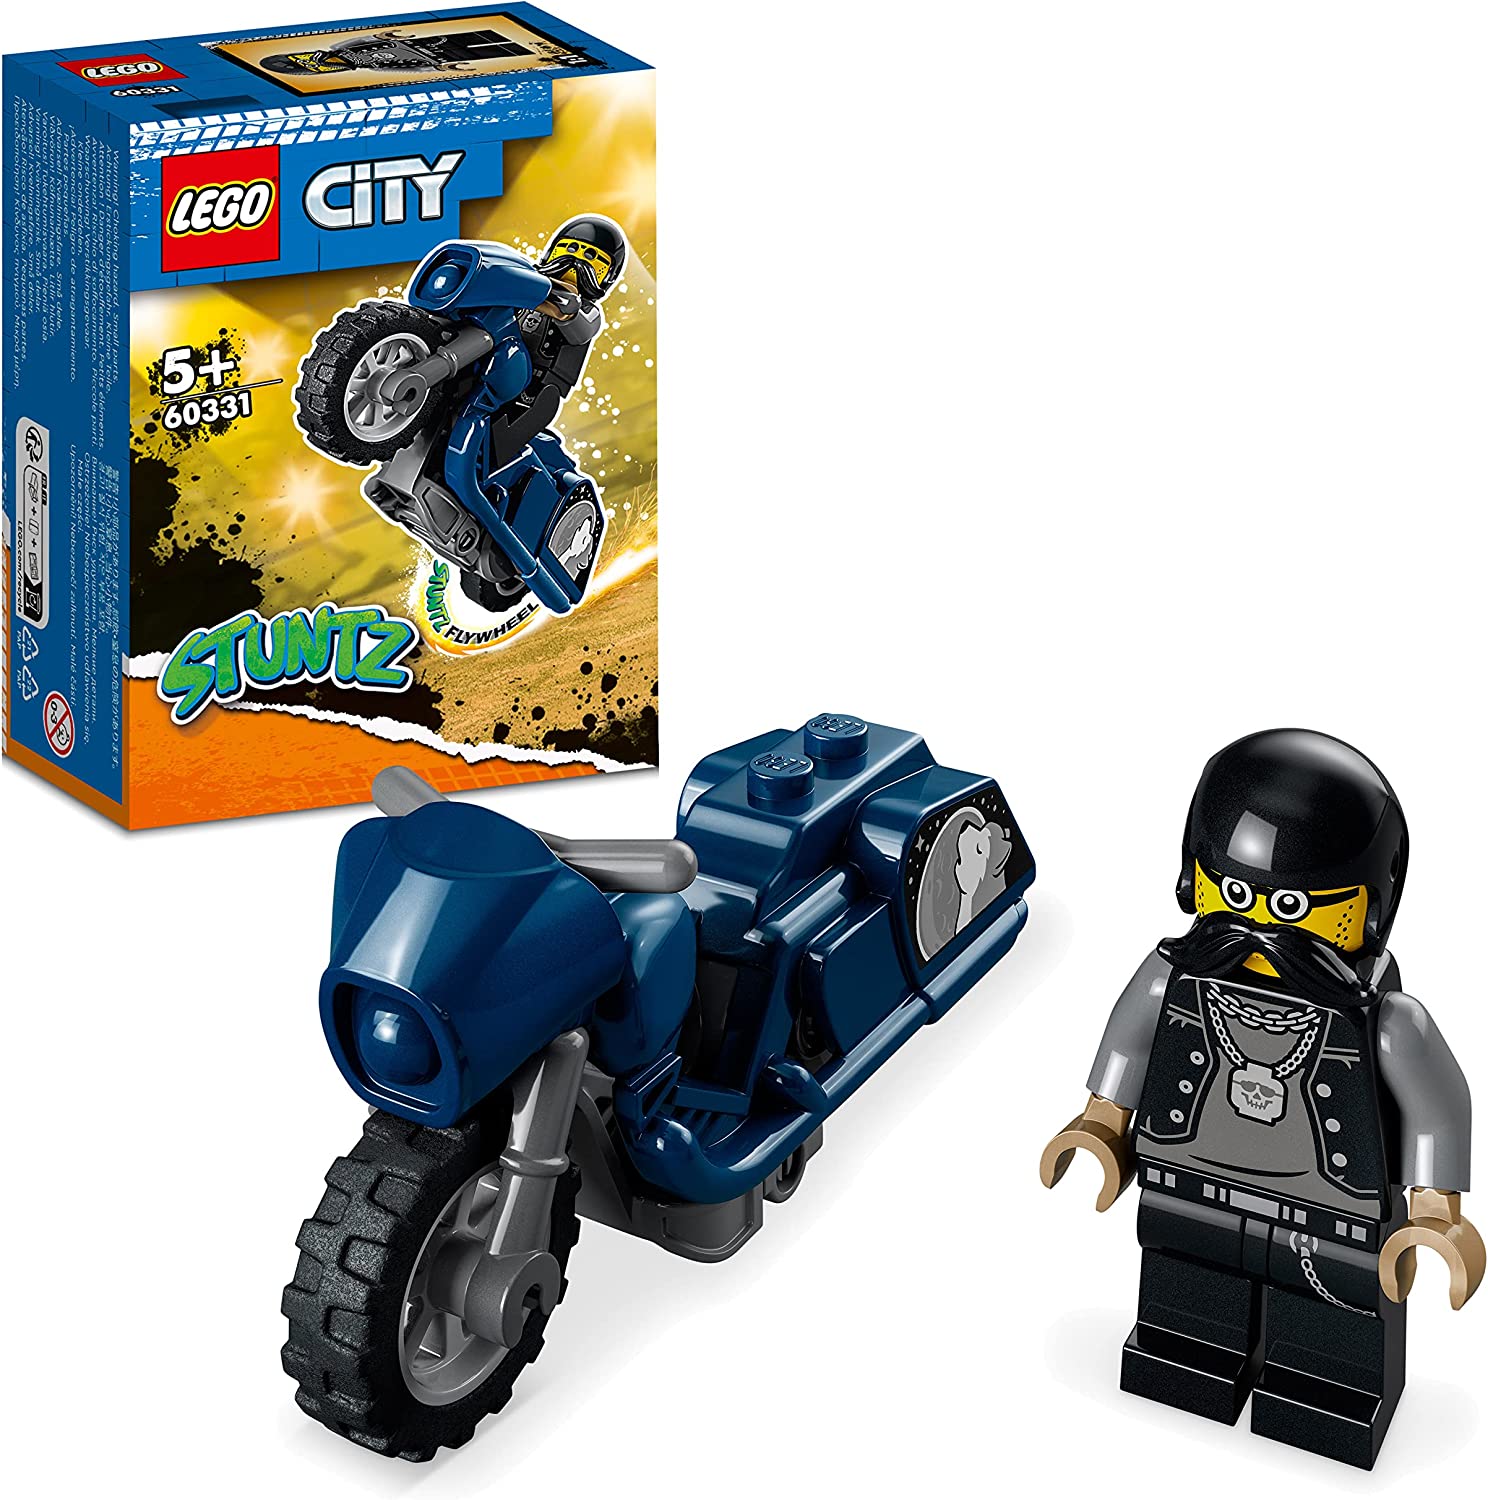 LEGO 60331 City Stuntz Cruiser Stunt Bike Set with Motorcycle and Mini Figure, Action Toy as a Gift for Children from 5 Years